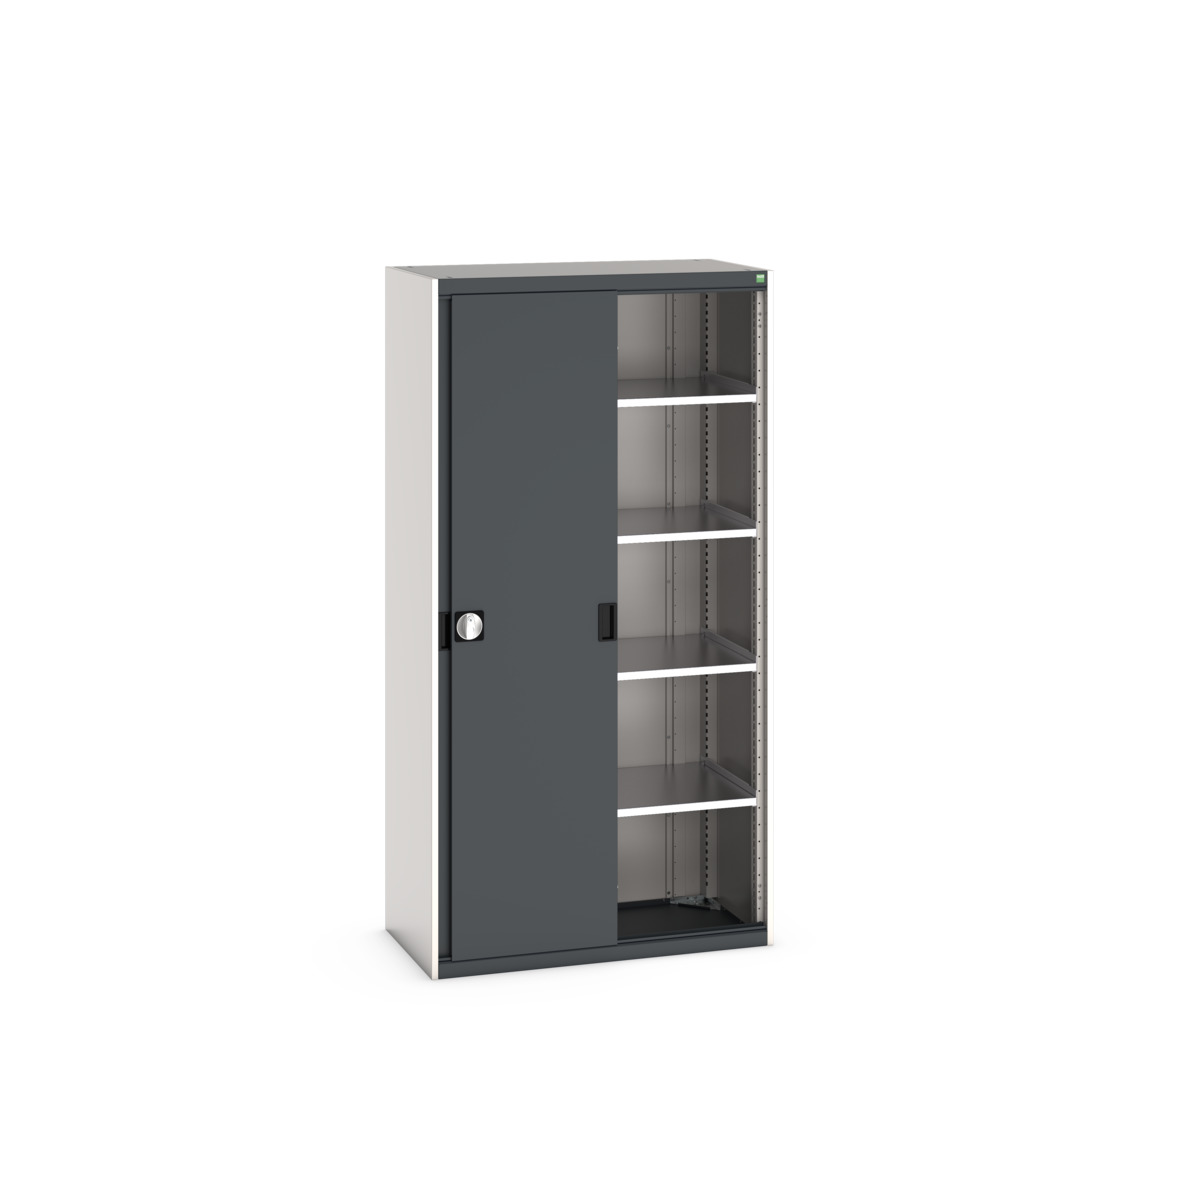 40013071.19V - Armoire Cubio SMS-10520-1.2